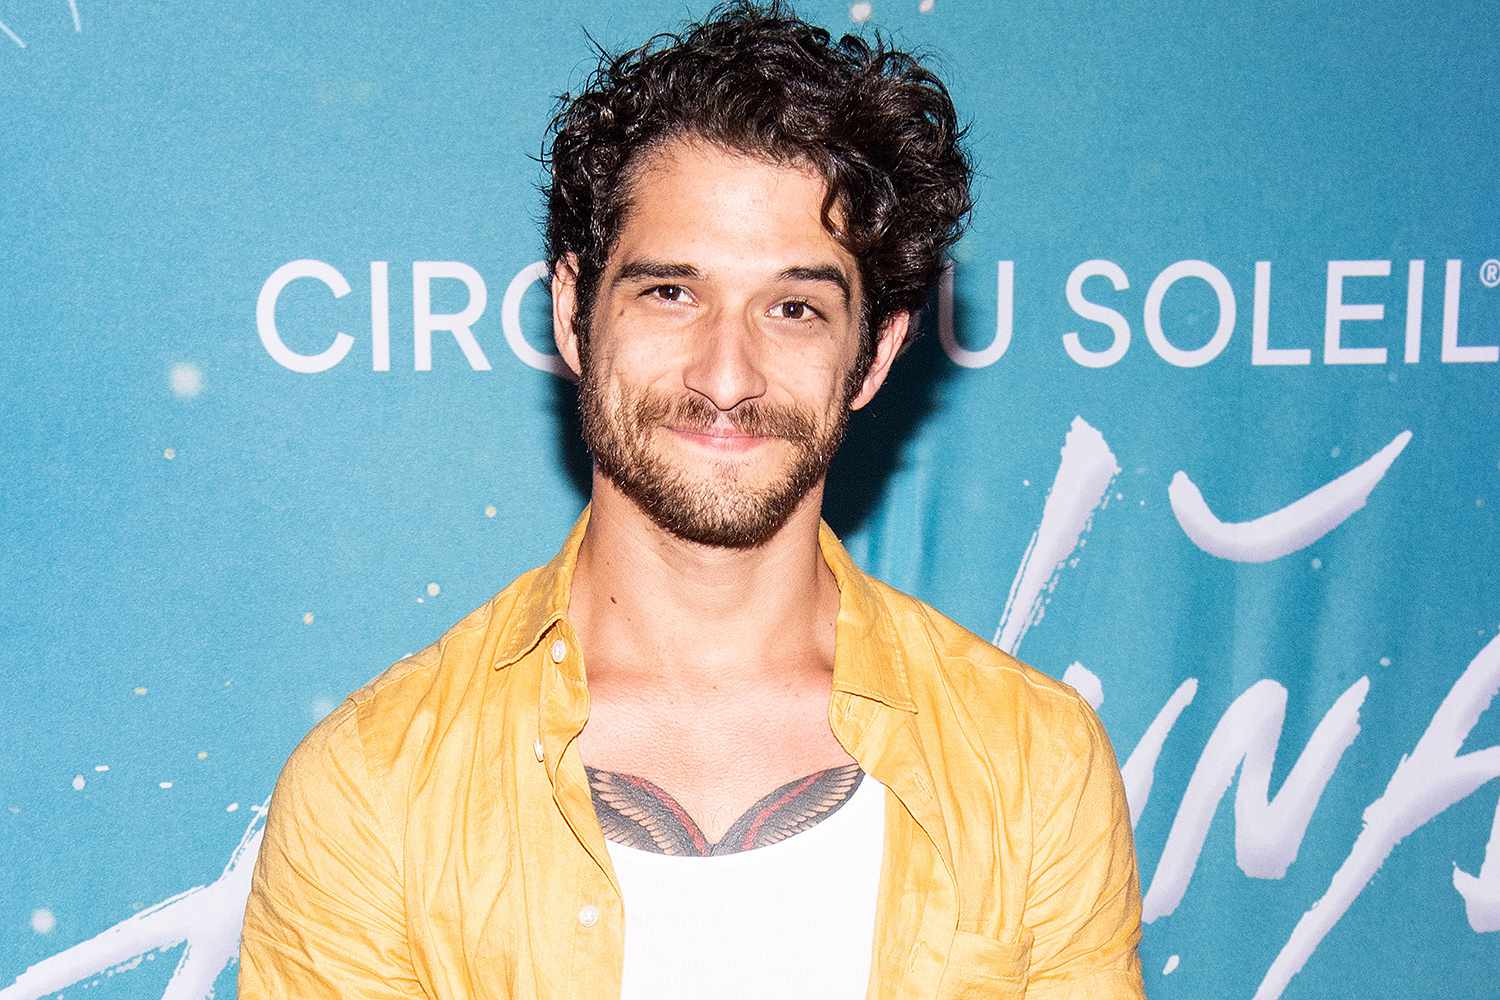 Tyler Posey wearing a yellow shirt at an event